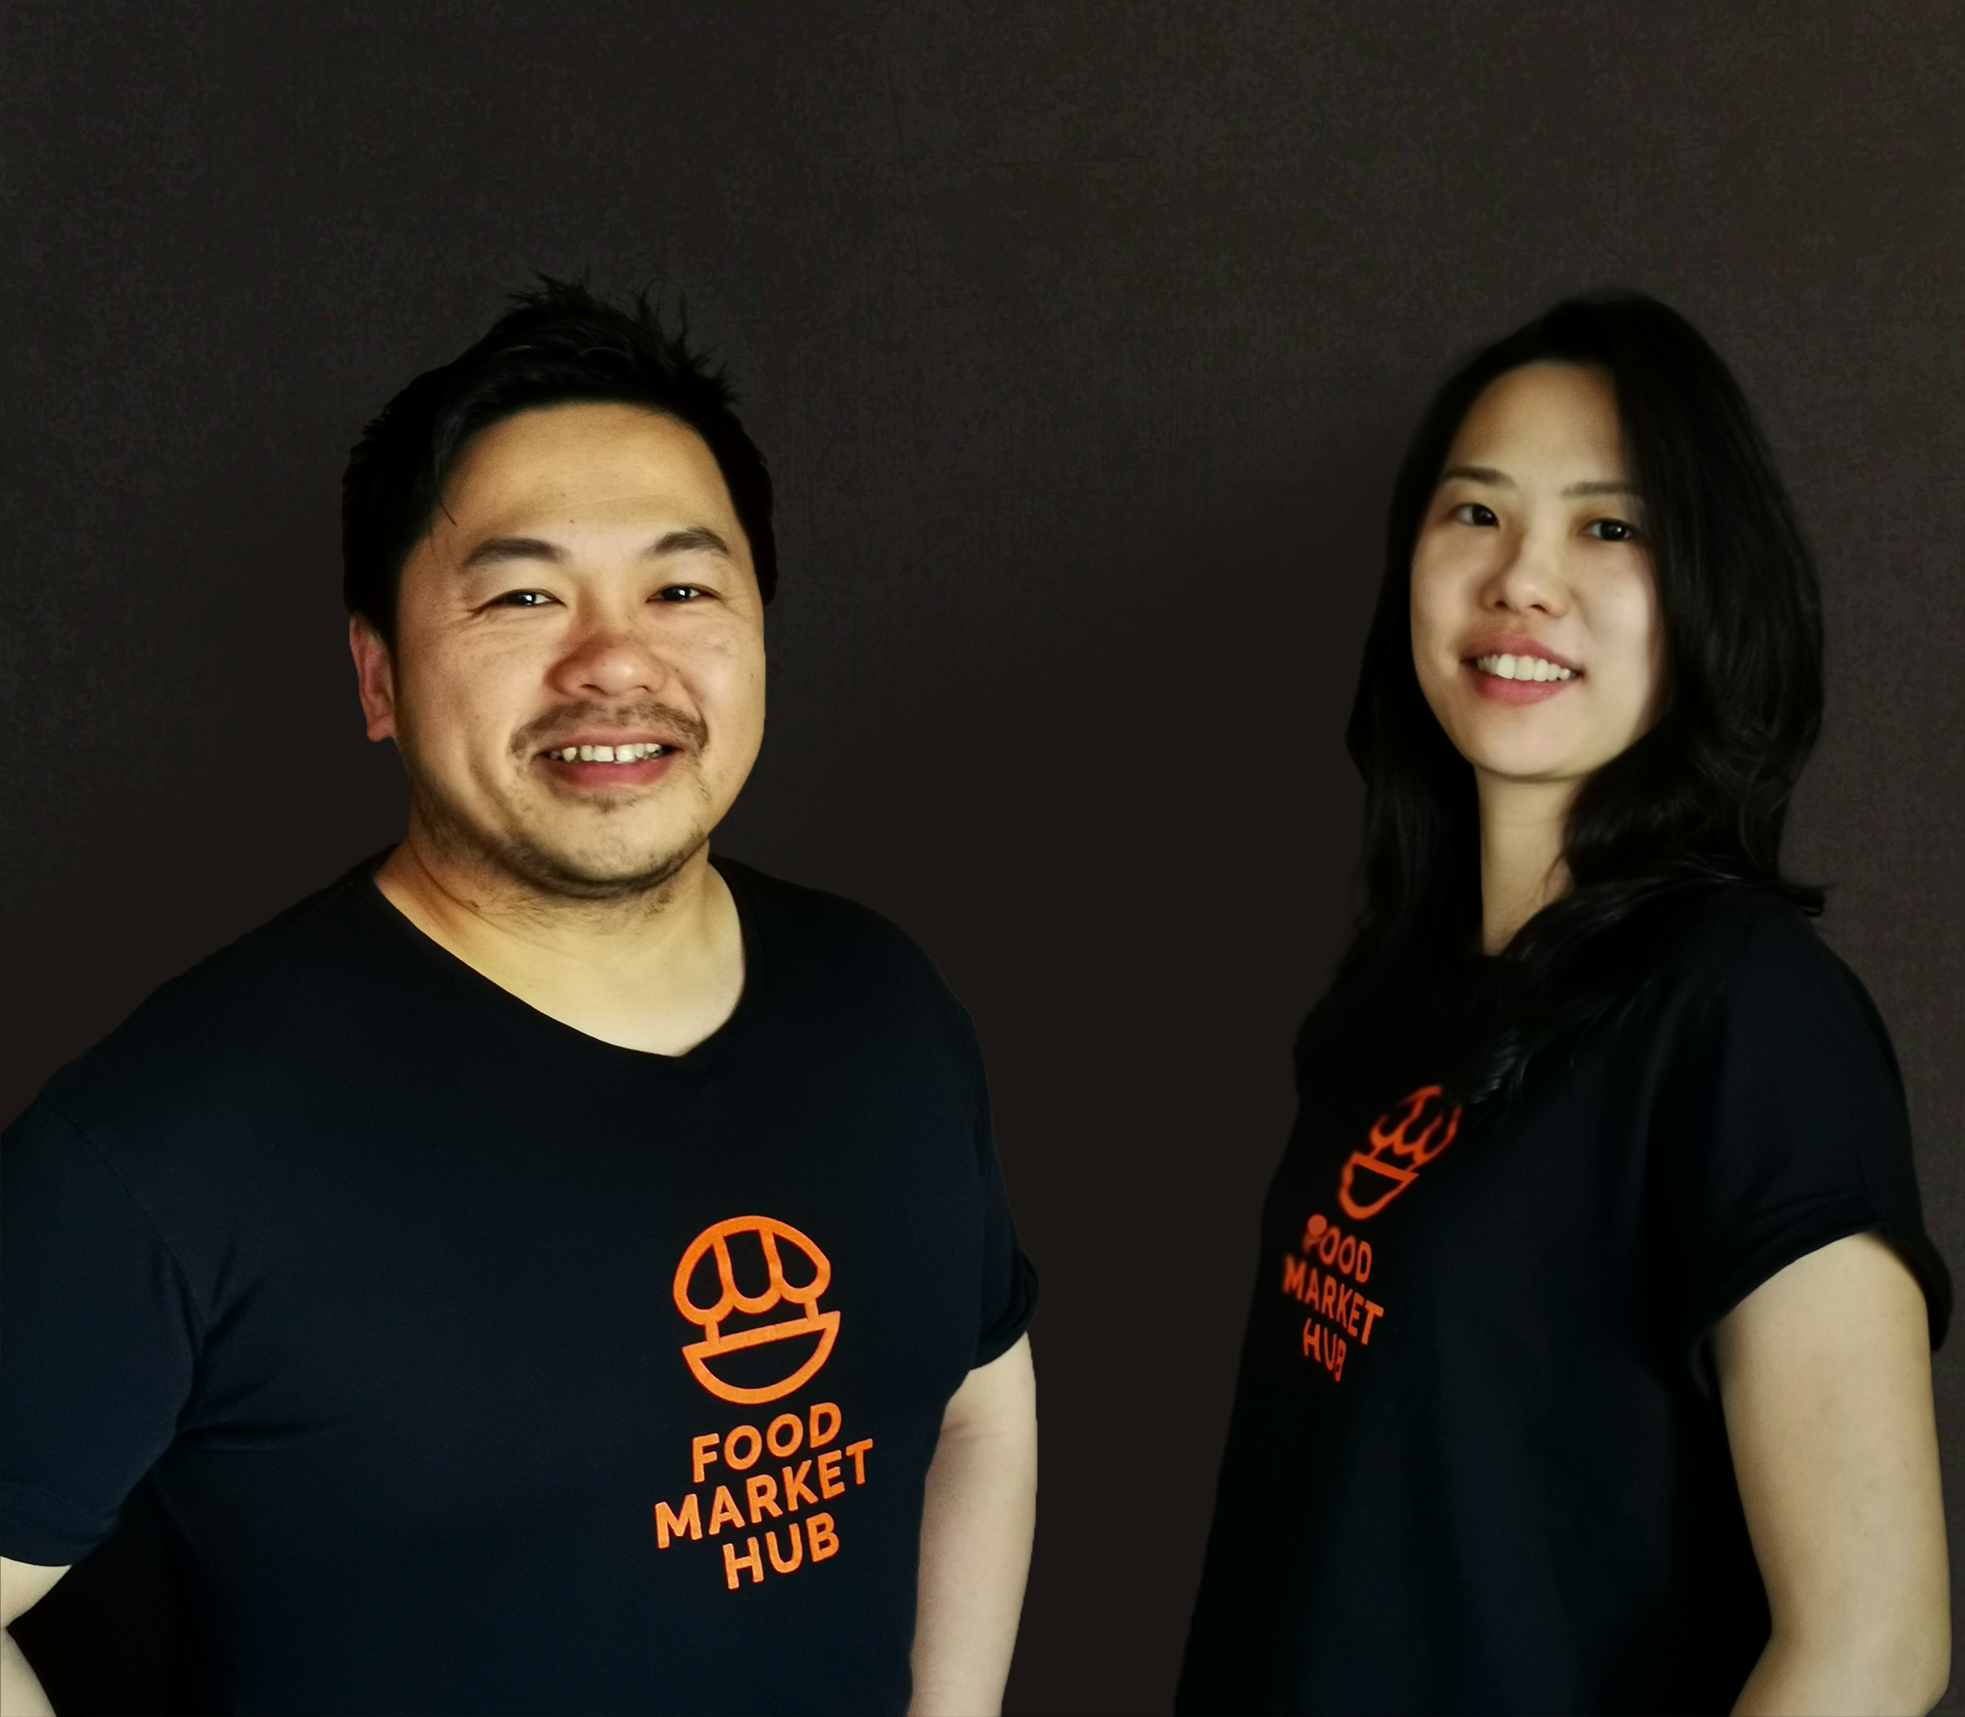 Malaysia’s Food Market Hub raises funds to expand into Indonesia, Thailand, and Vietnam